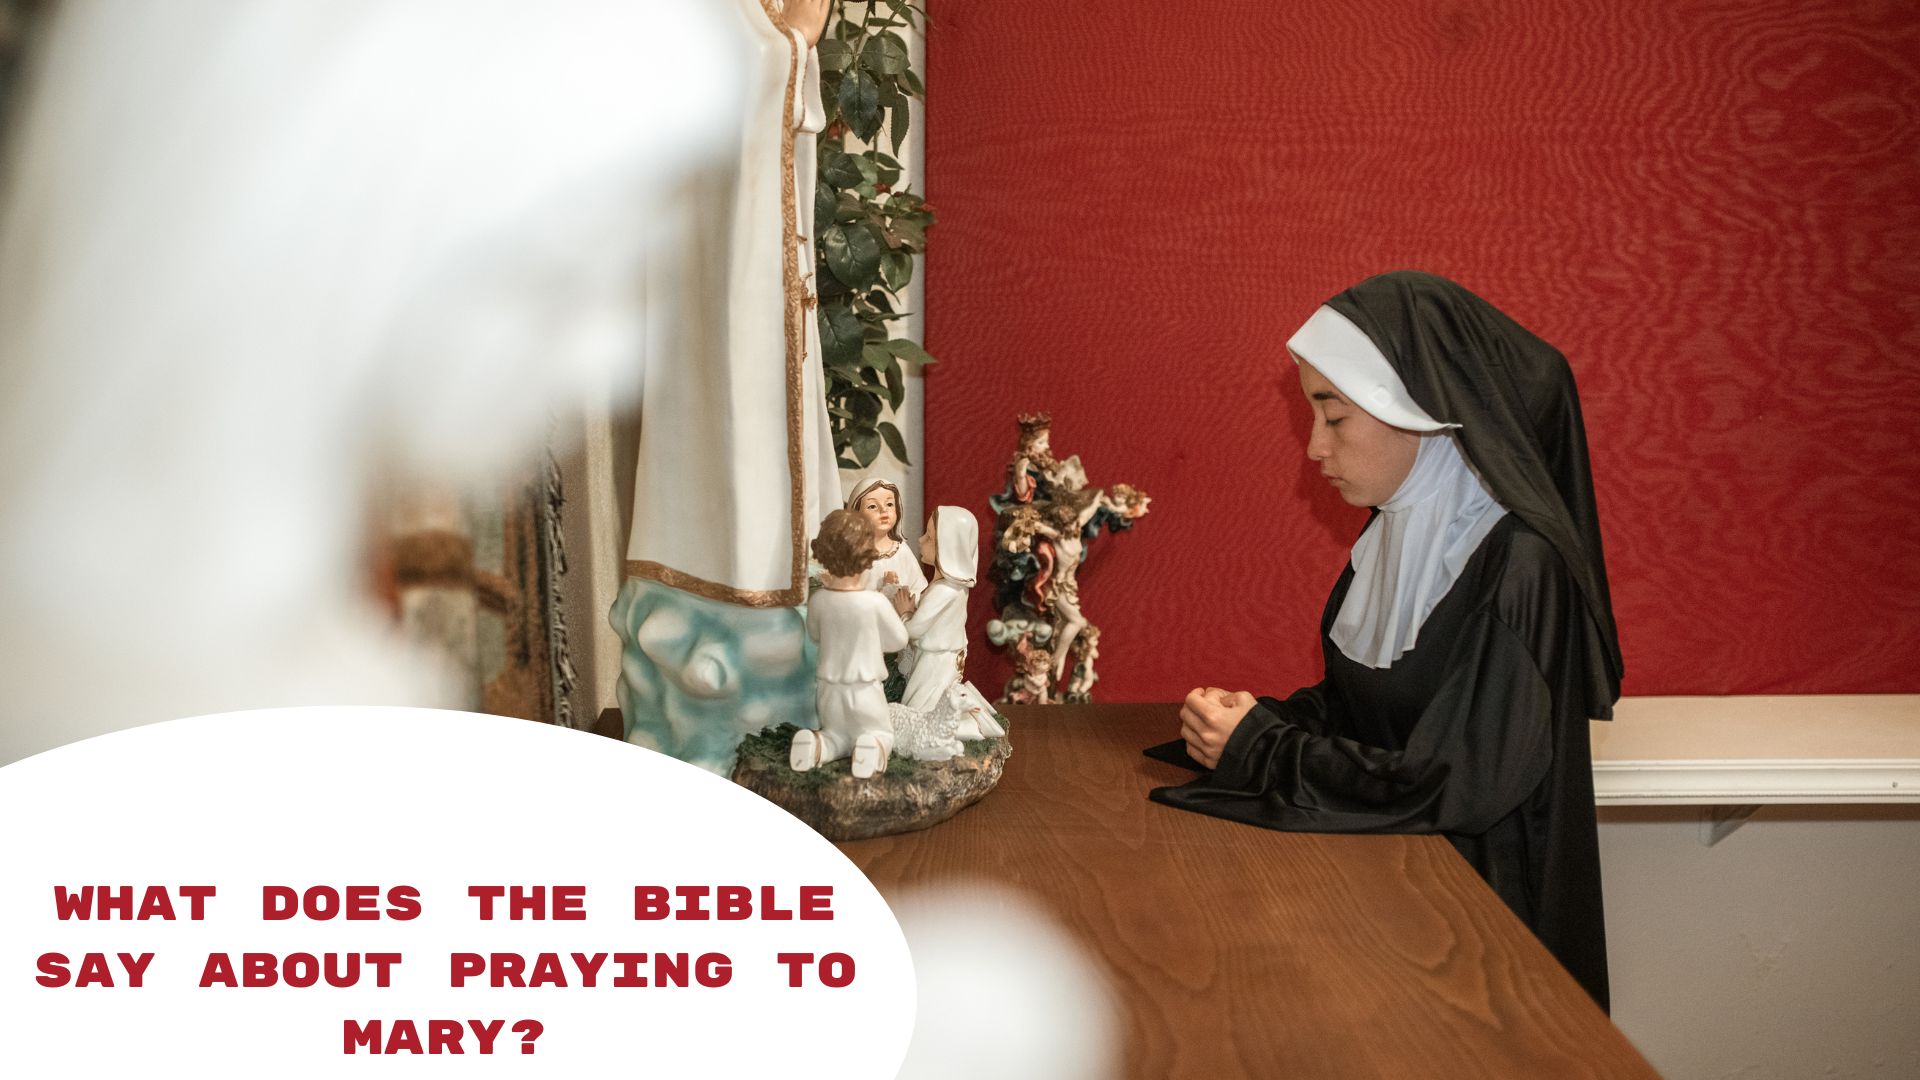 What Does The Bible Say About Praying To Mary?